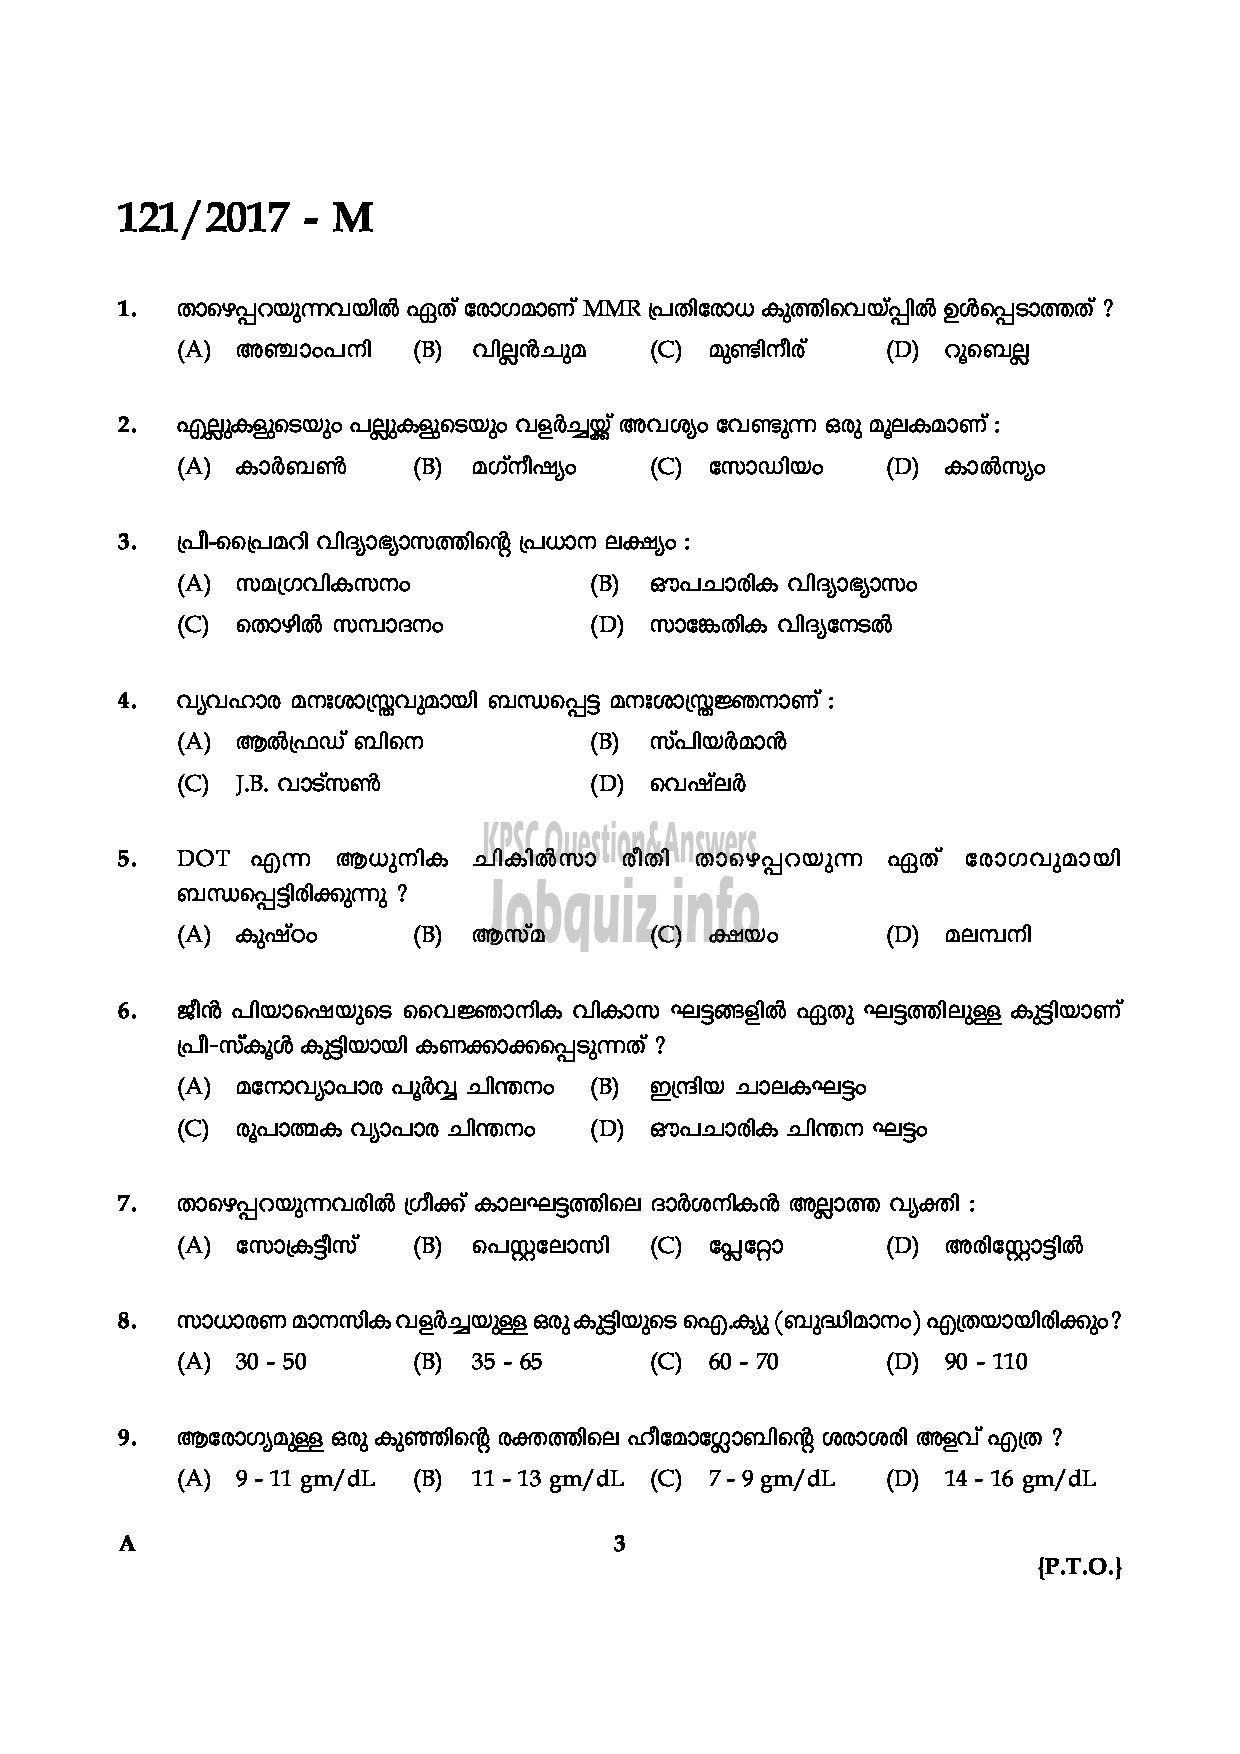 Kerala PSC Question Paper - PRE PRIMARY TEACHER EDUCATION MALAYALAM QUESTION -3